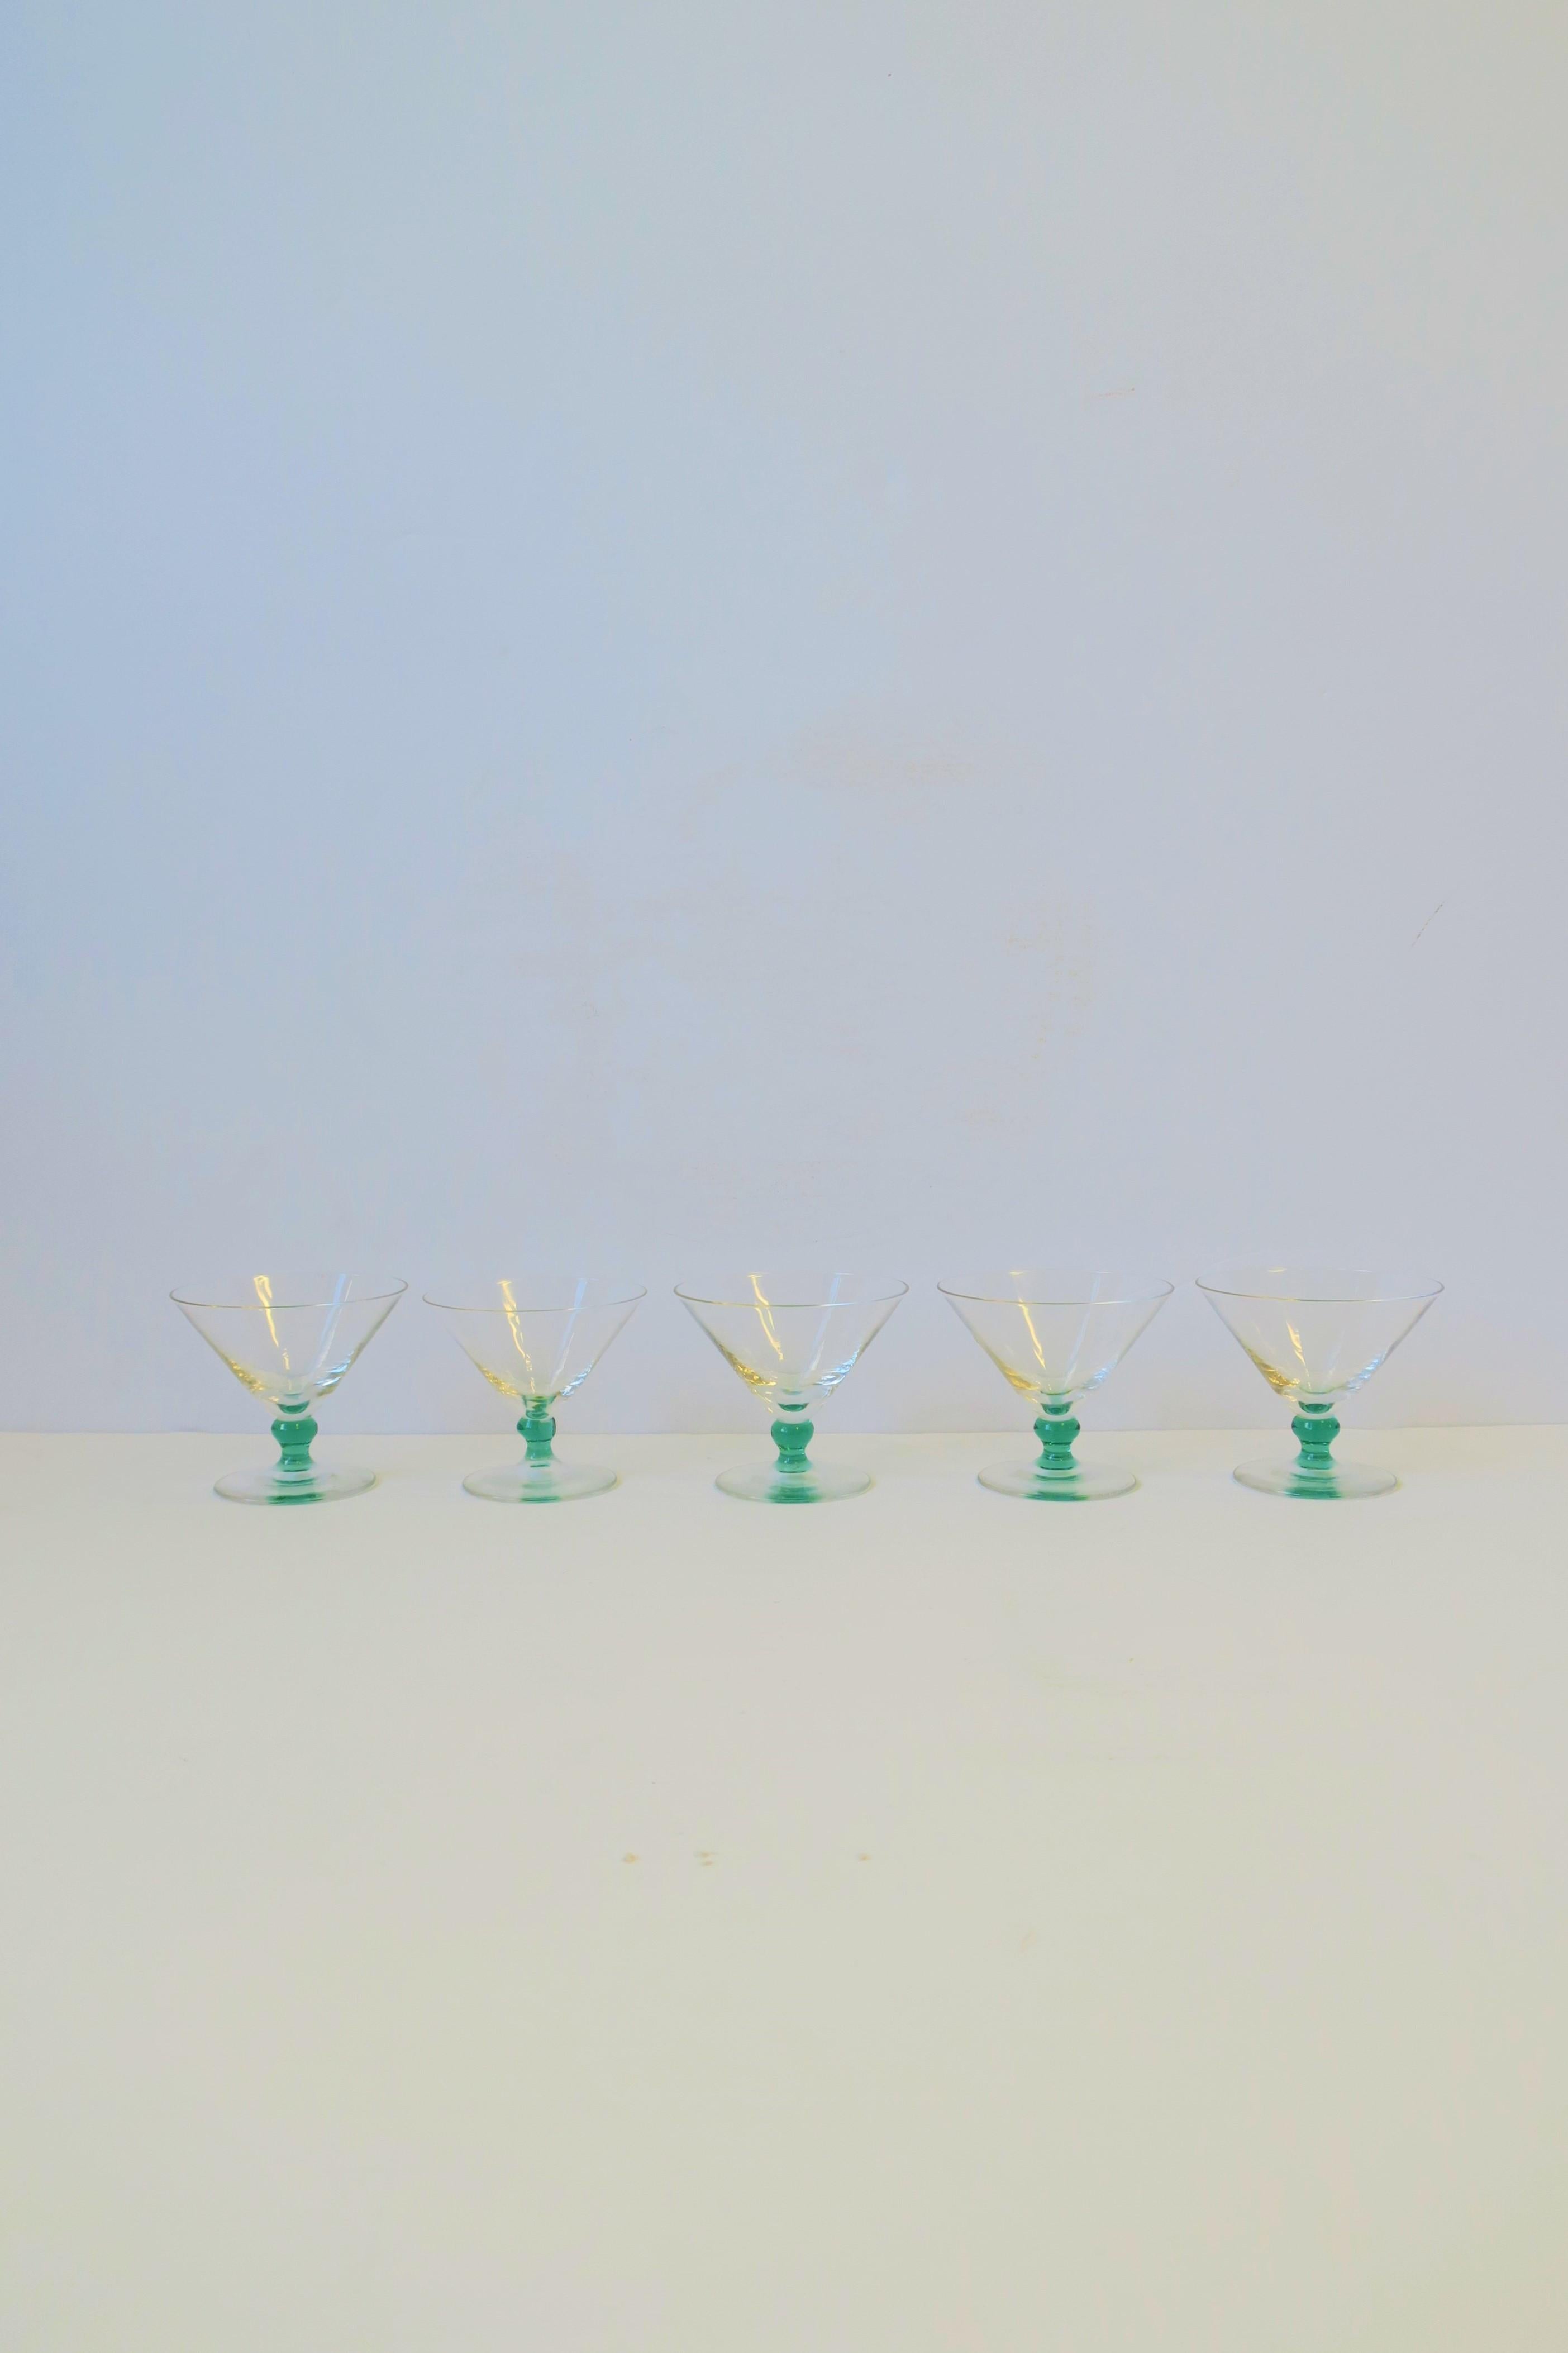 A beautiful set of 5 mini Martini art glass shot glasses with a touch of emerald green art glass at stem. A great set for summer or holiday entertaining. And a great addition to any bar, bar cart, tray, etc. Each glass measures: 2.50